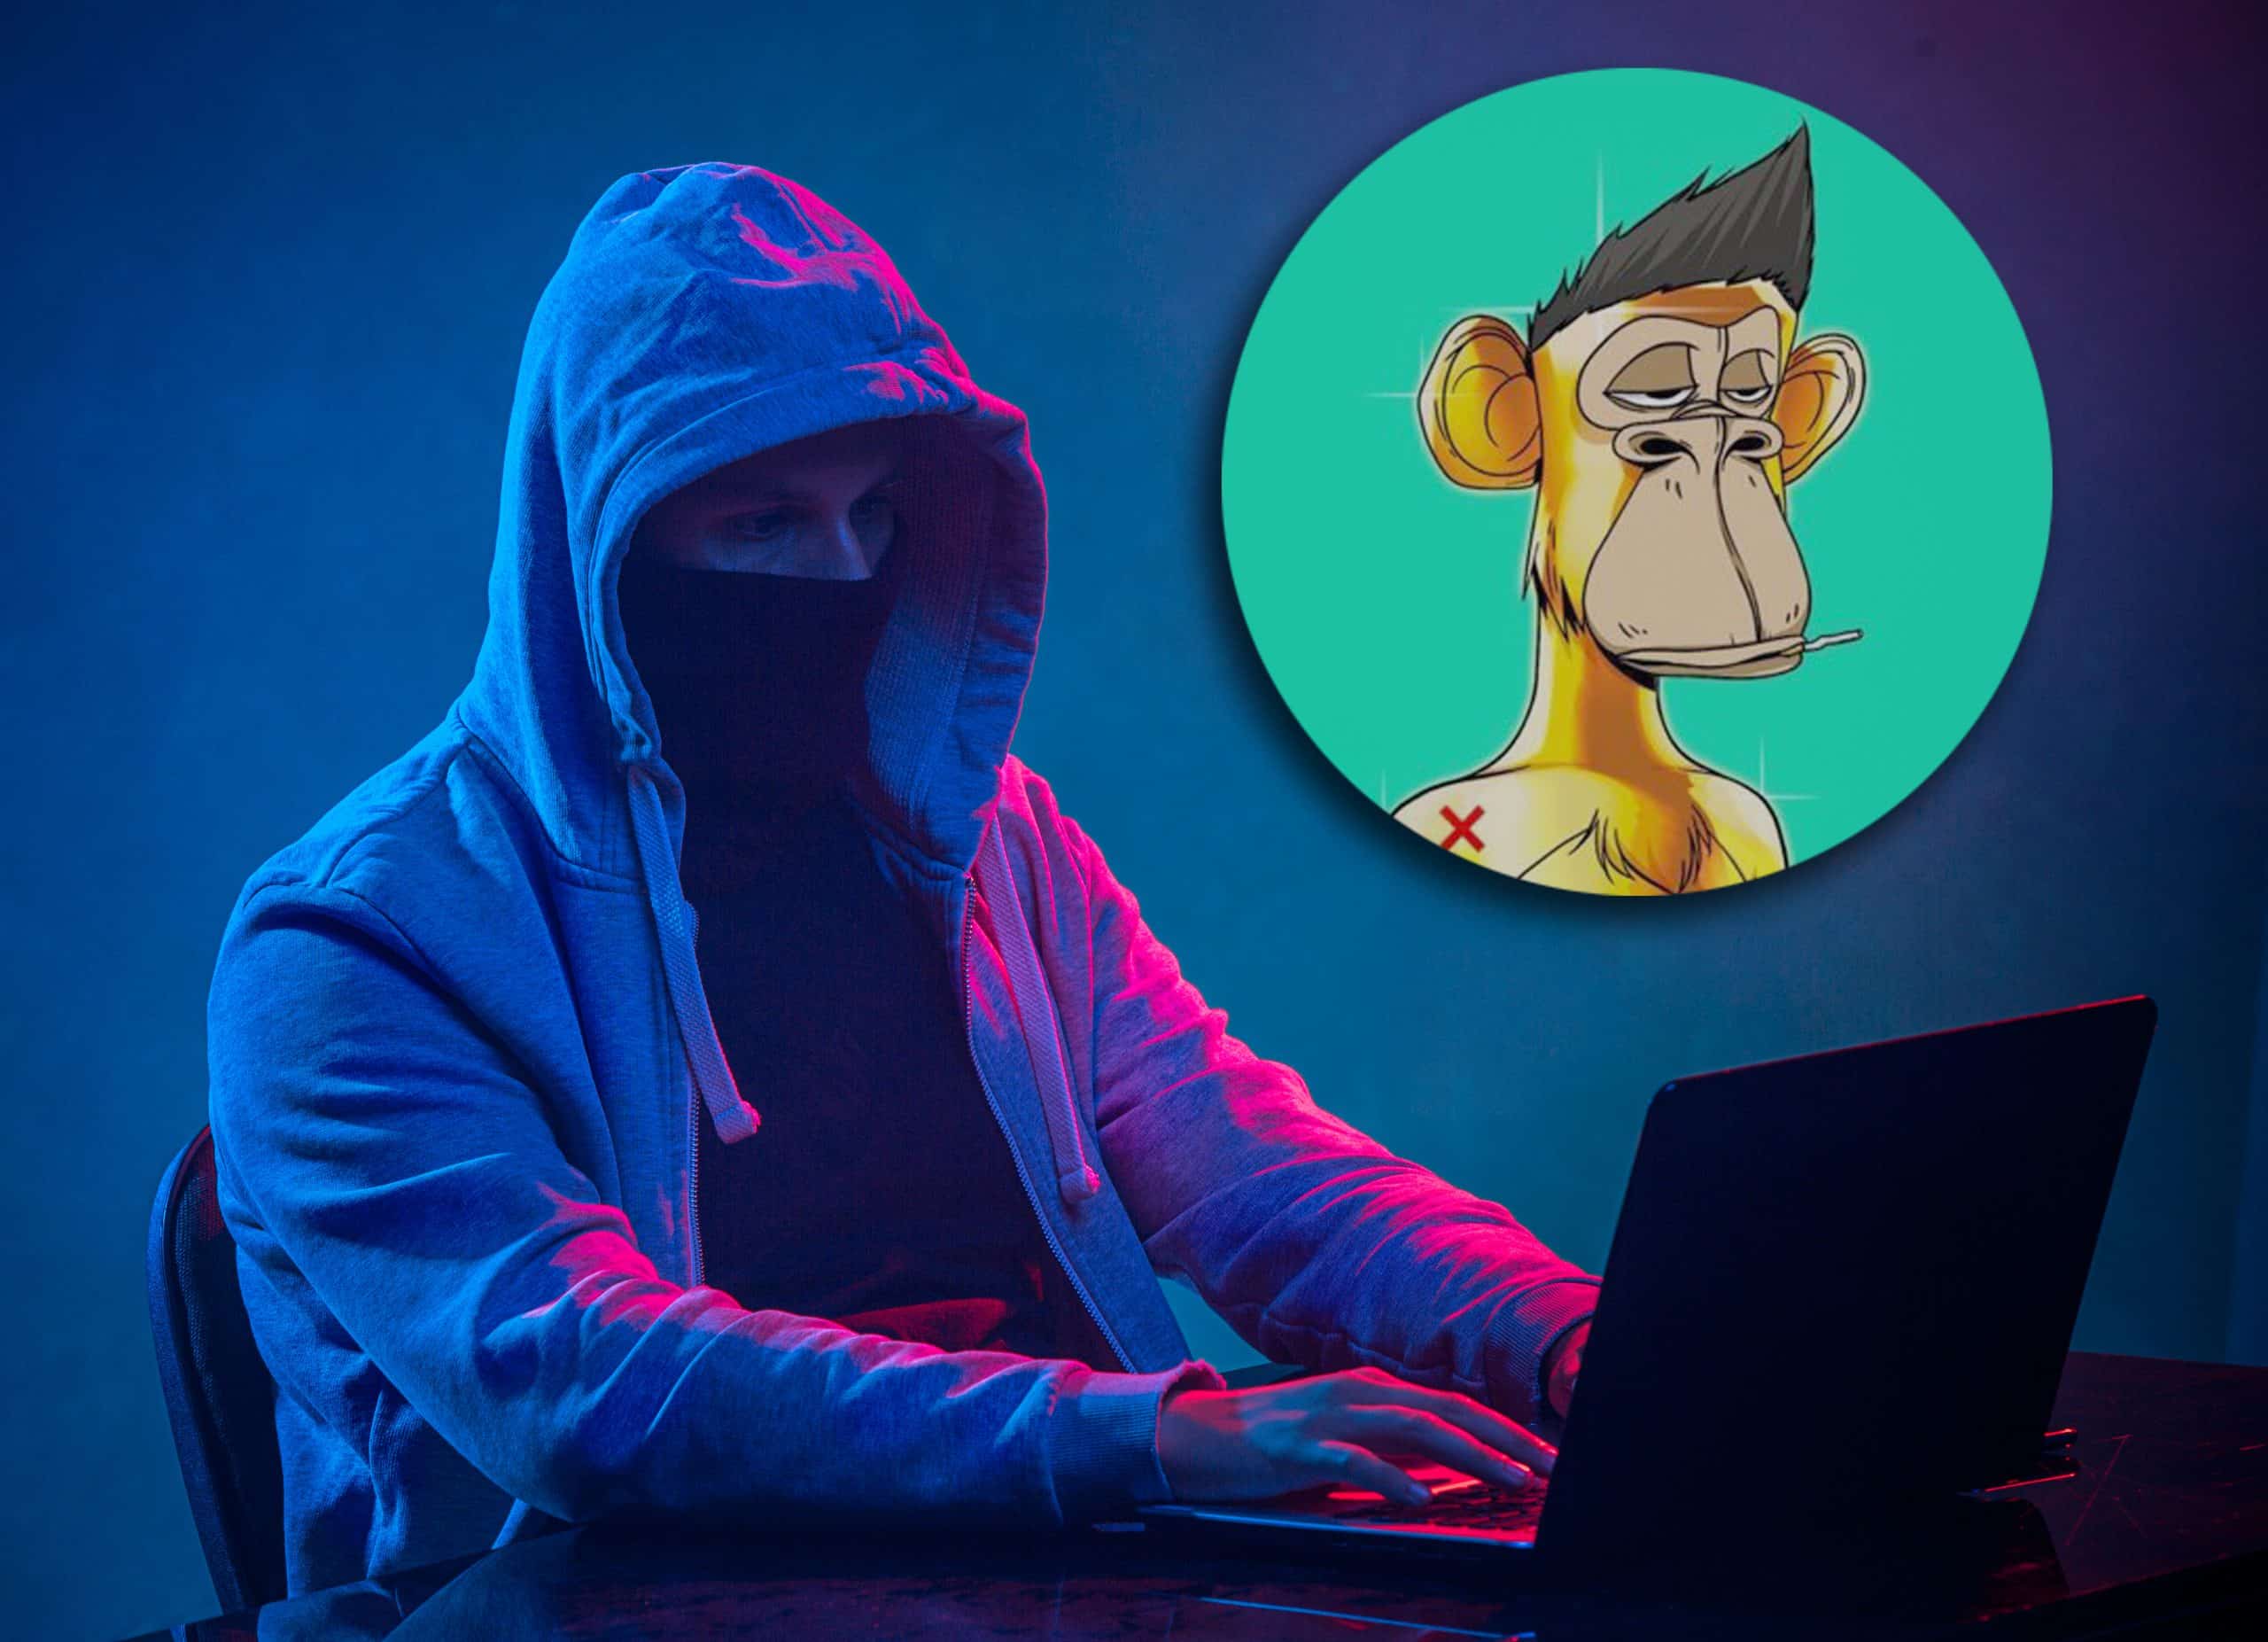 Hooded computer hacker stealing information with laptop on colored studio background